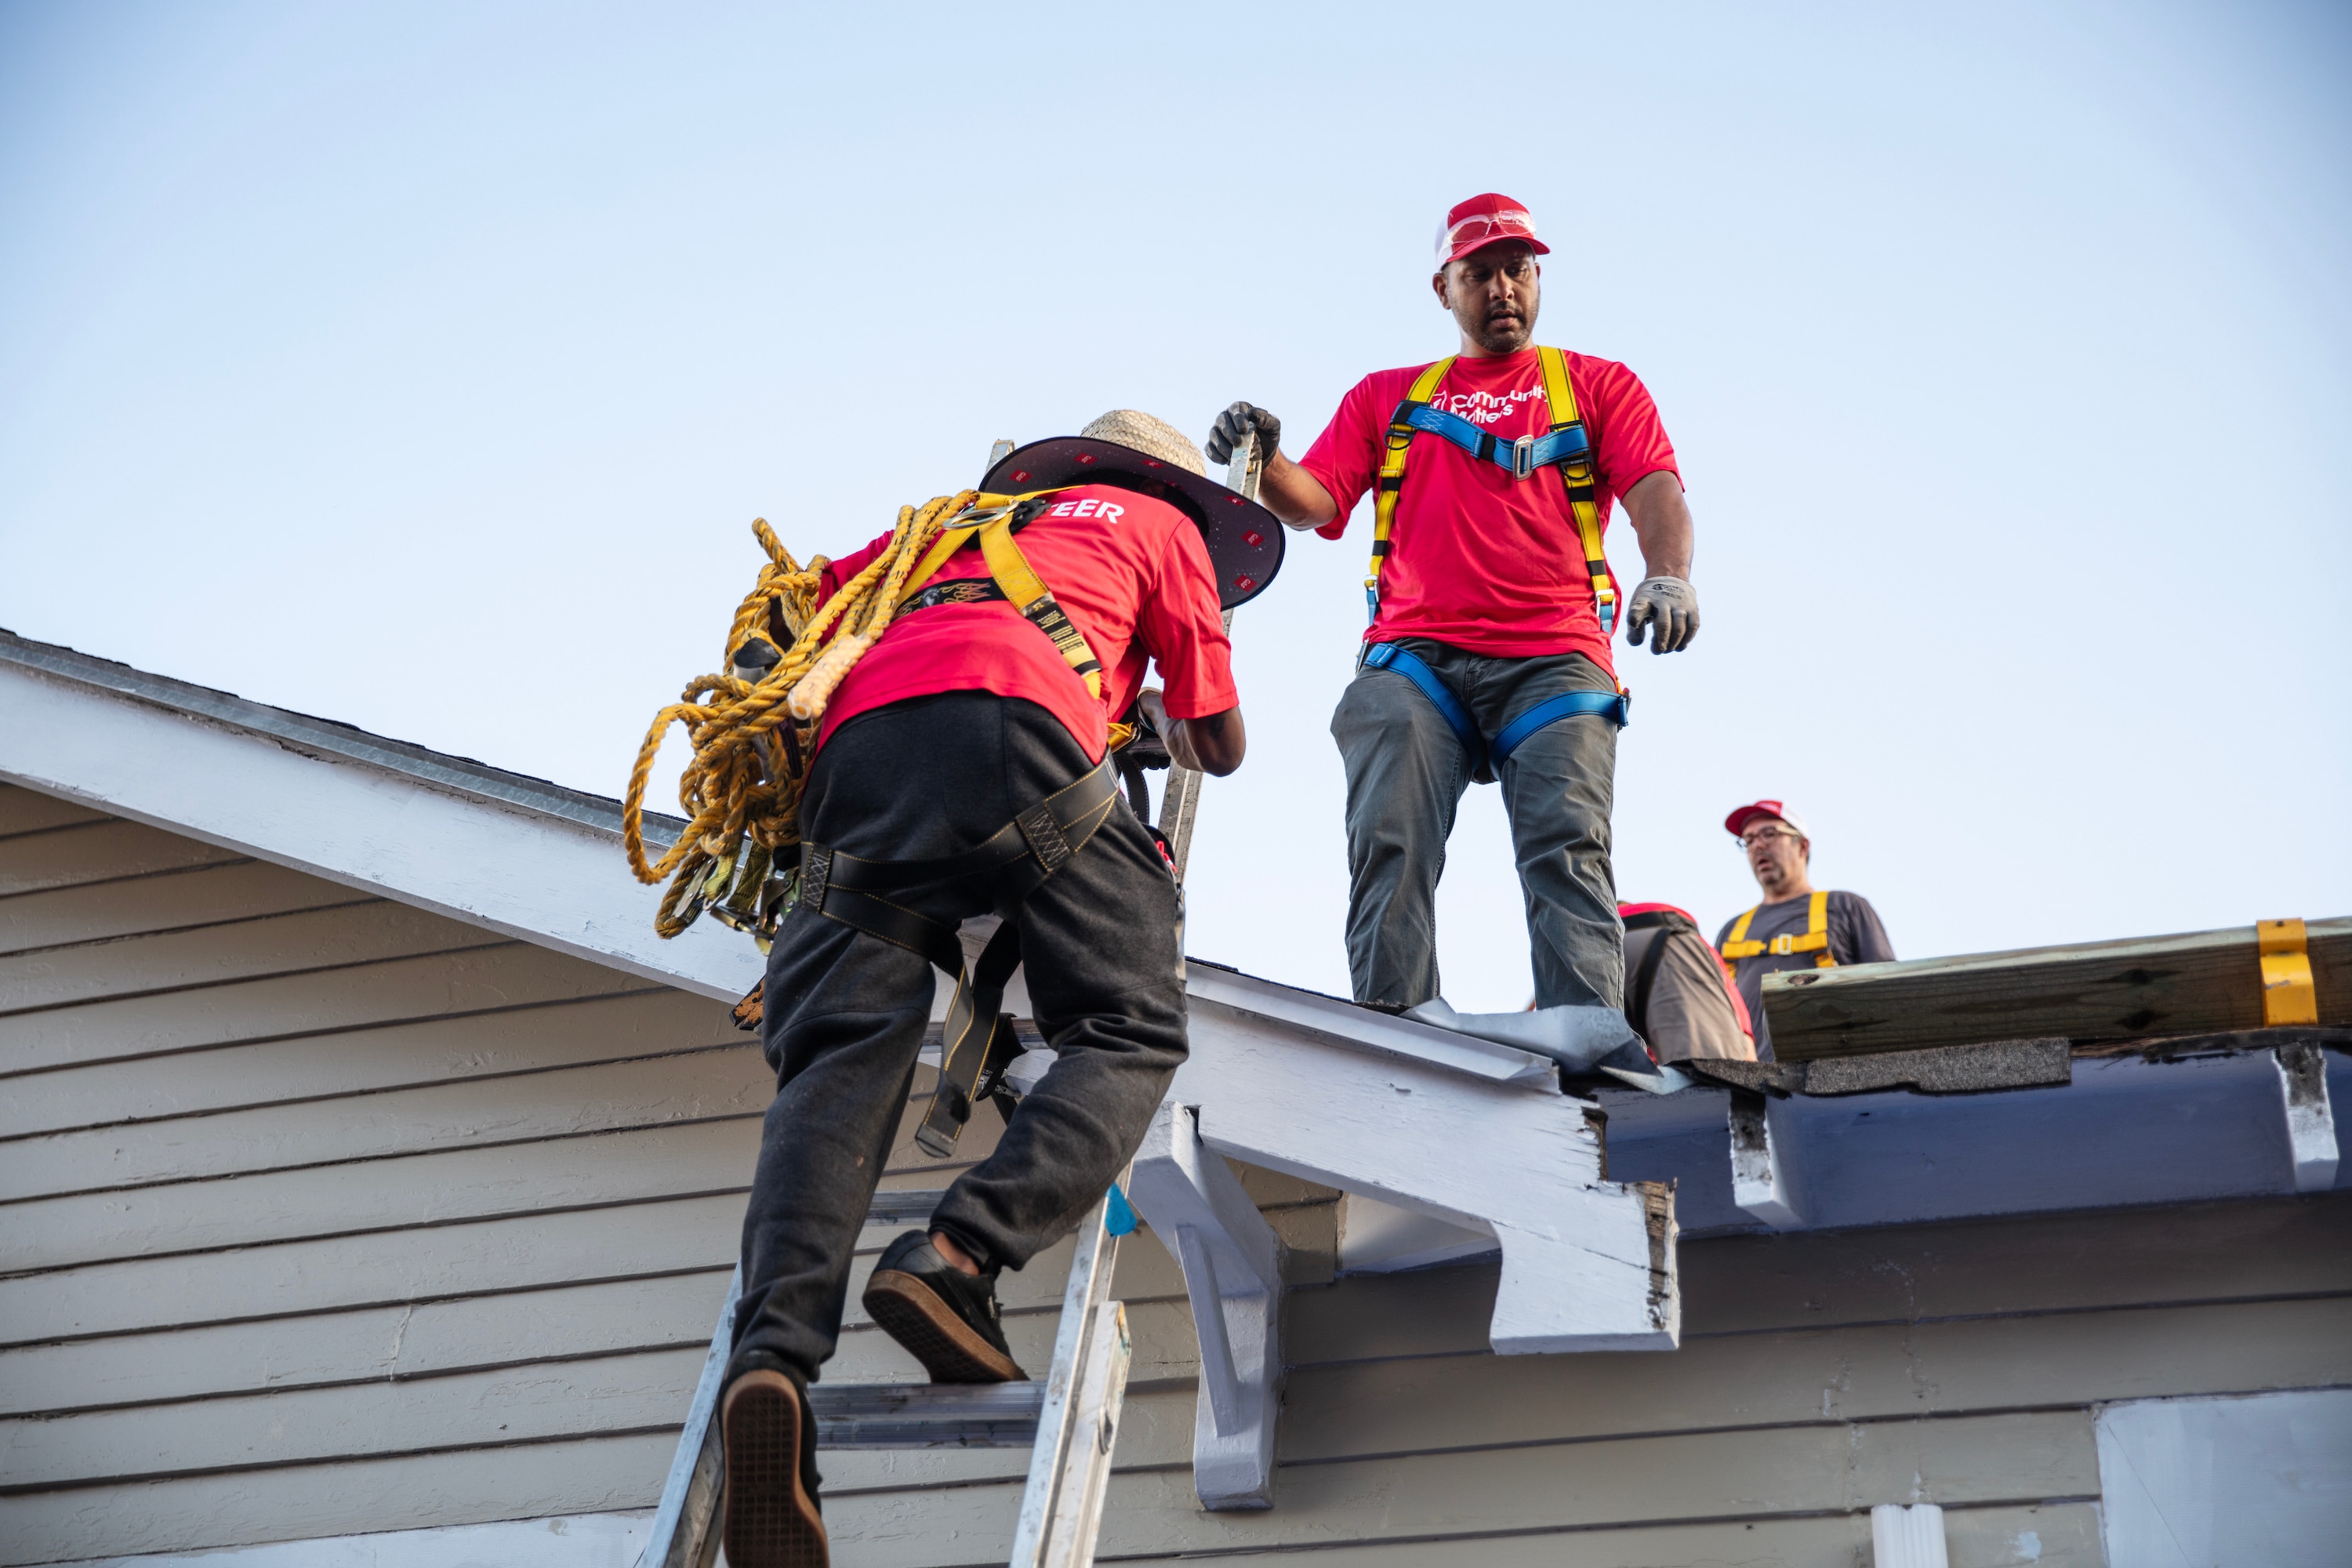 Gary Pierson stands on a roof while a volunteer climbs a ladder